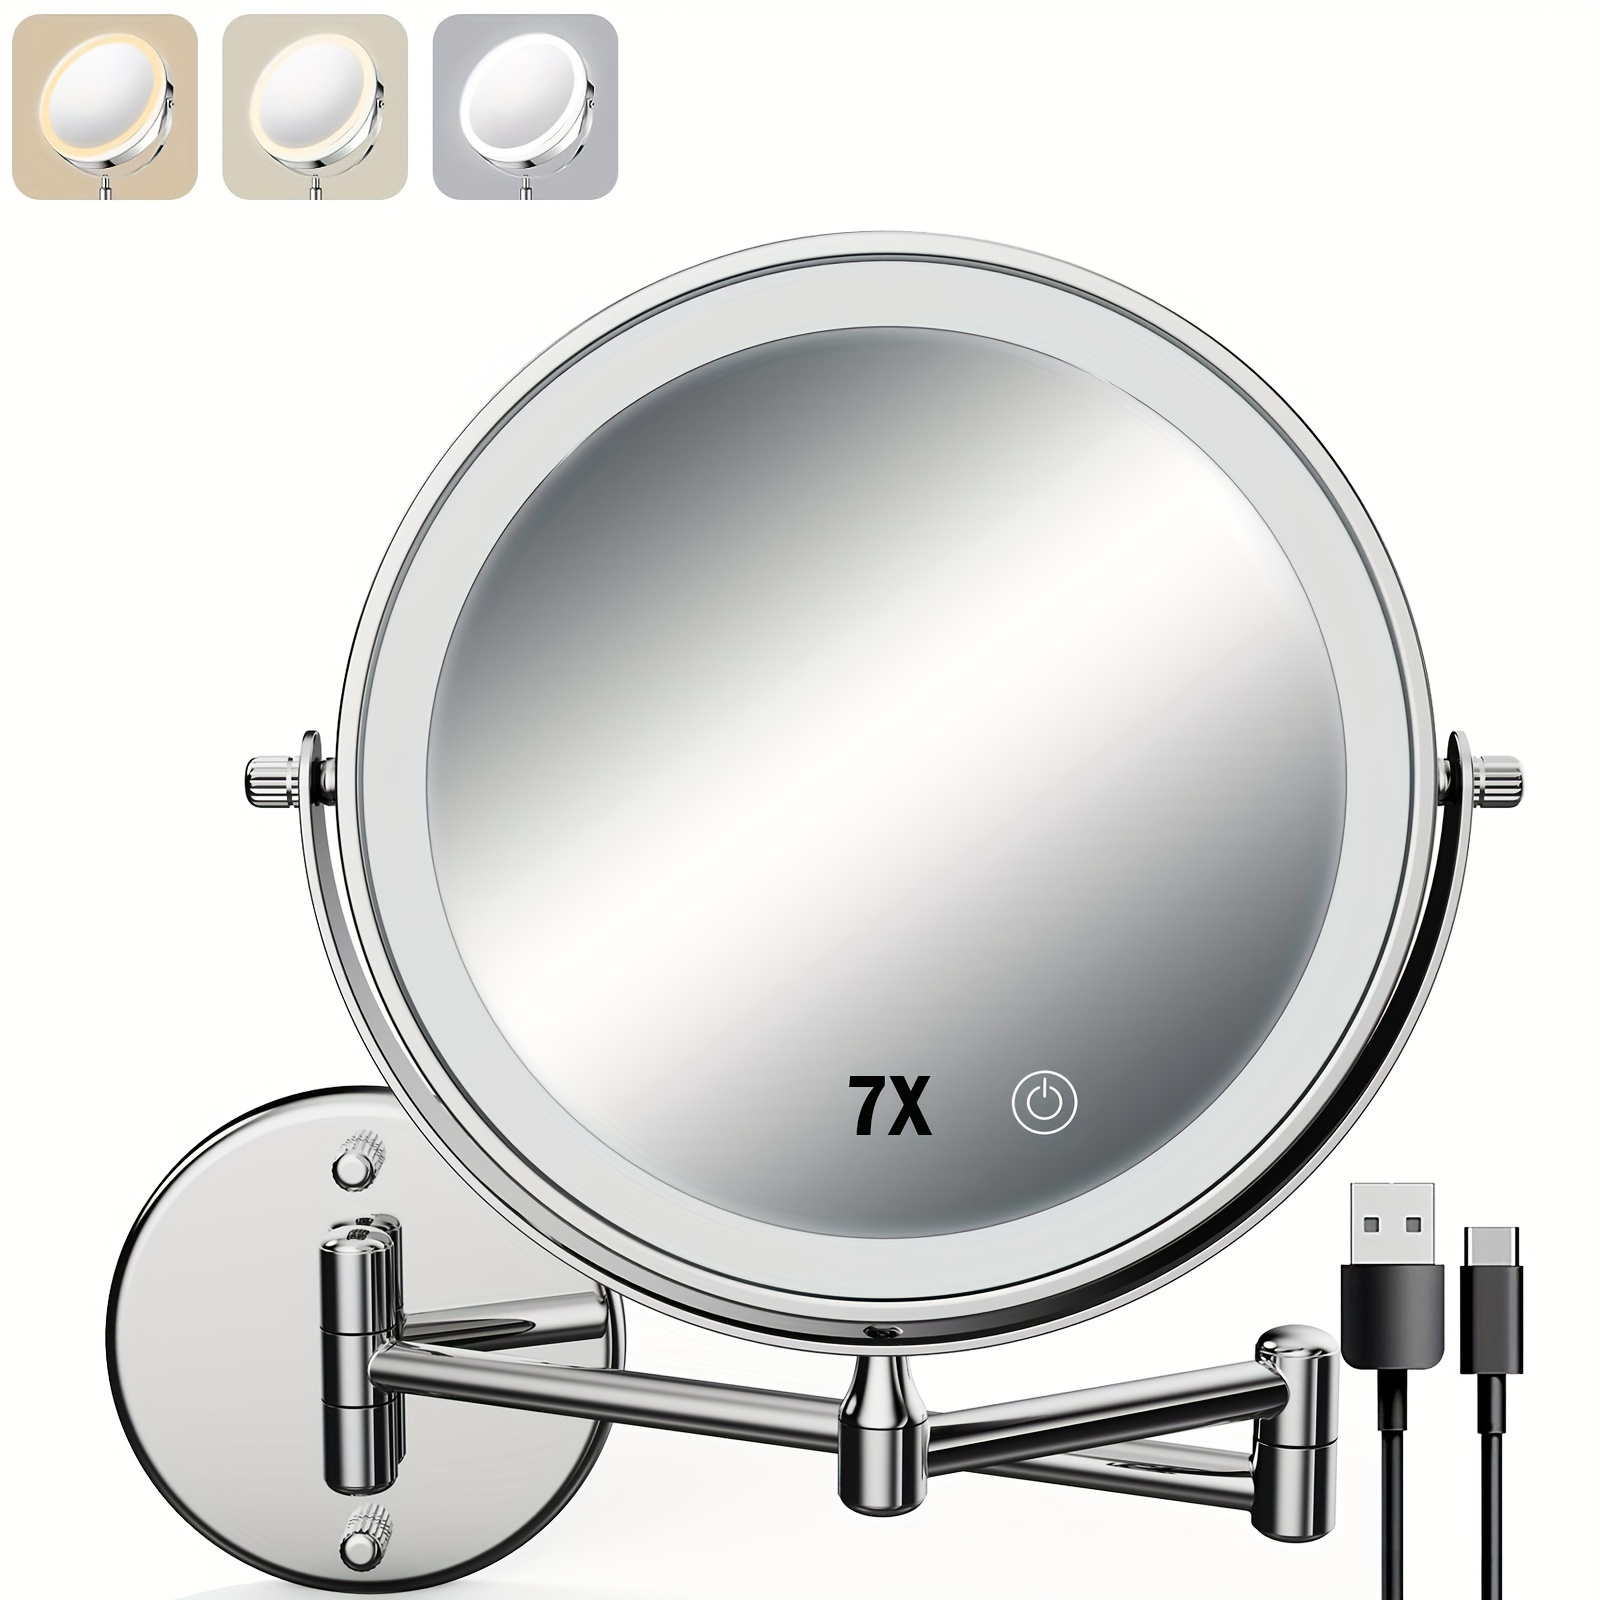 

Rechargeable Lighted Wall Mounted Makeup Mirror, Double Sided 1x/7x Magnifying Mirror, 3 Lights Option Dimmable, Extension Foldable Arm, Round Wall Mounted Mirror For Bathroom